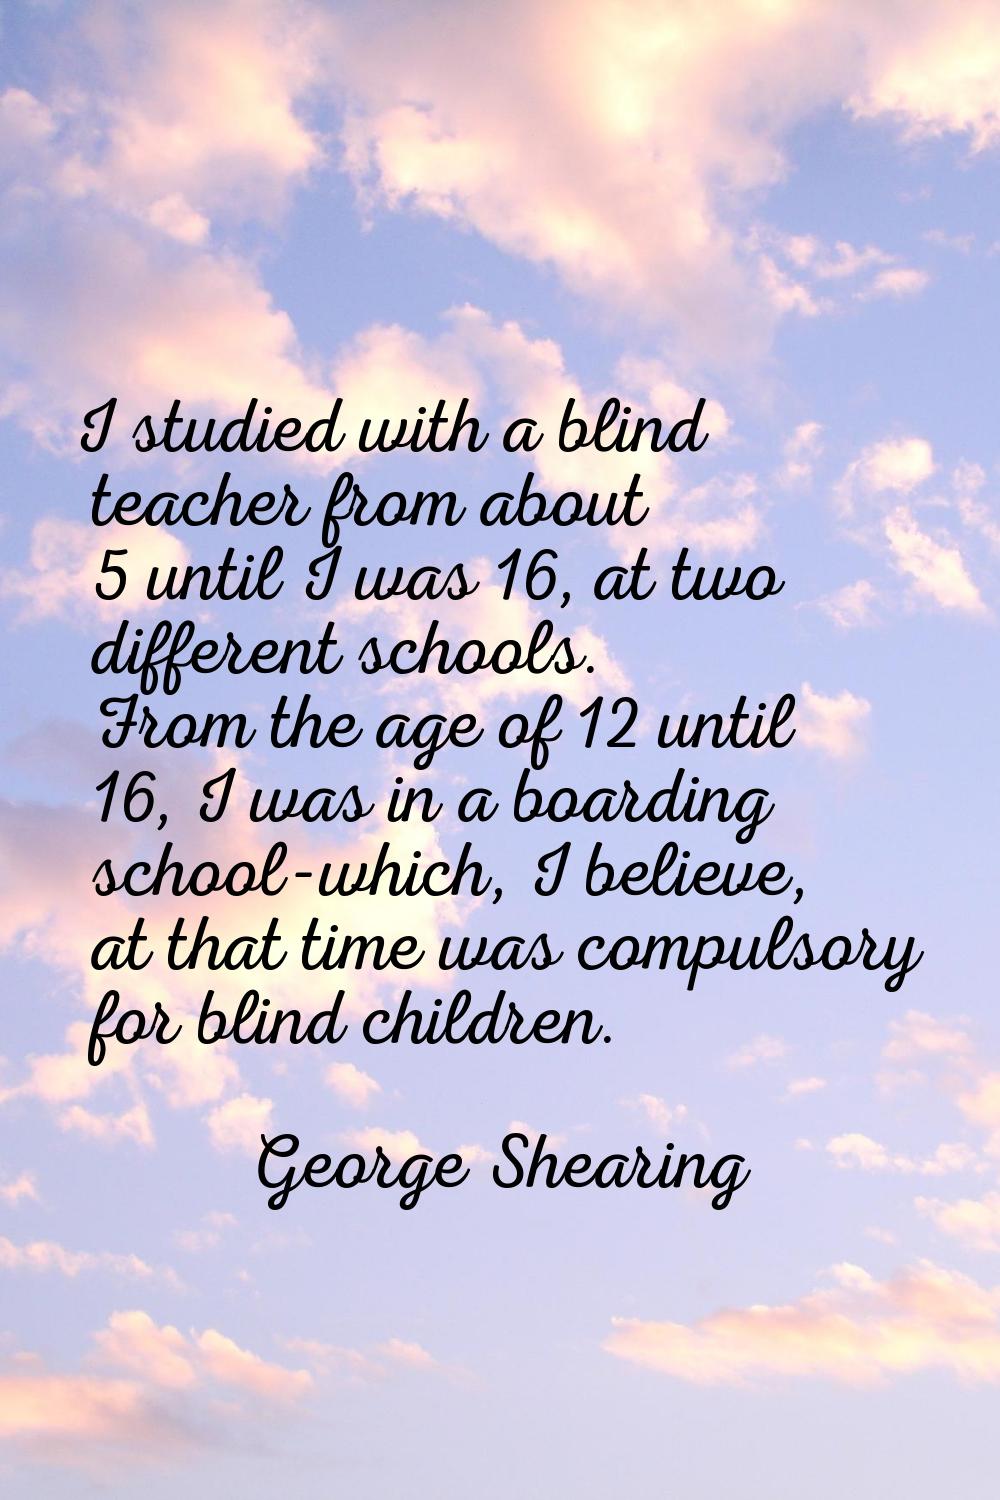 I studied with a blind teacher from about 5 until I was 16, at two different schools. From the age 